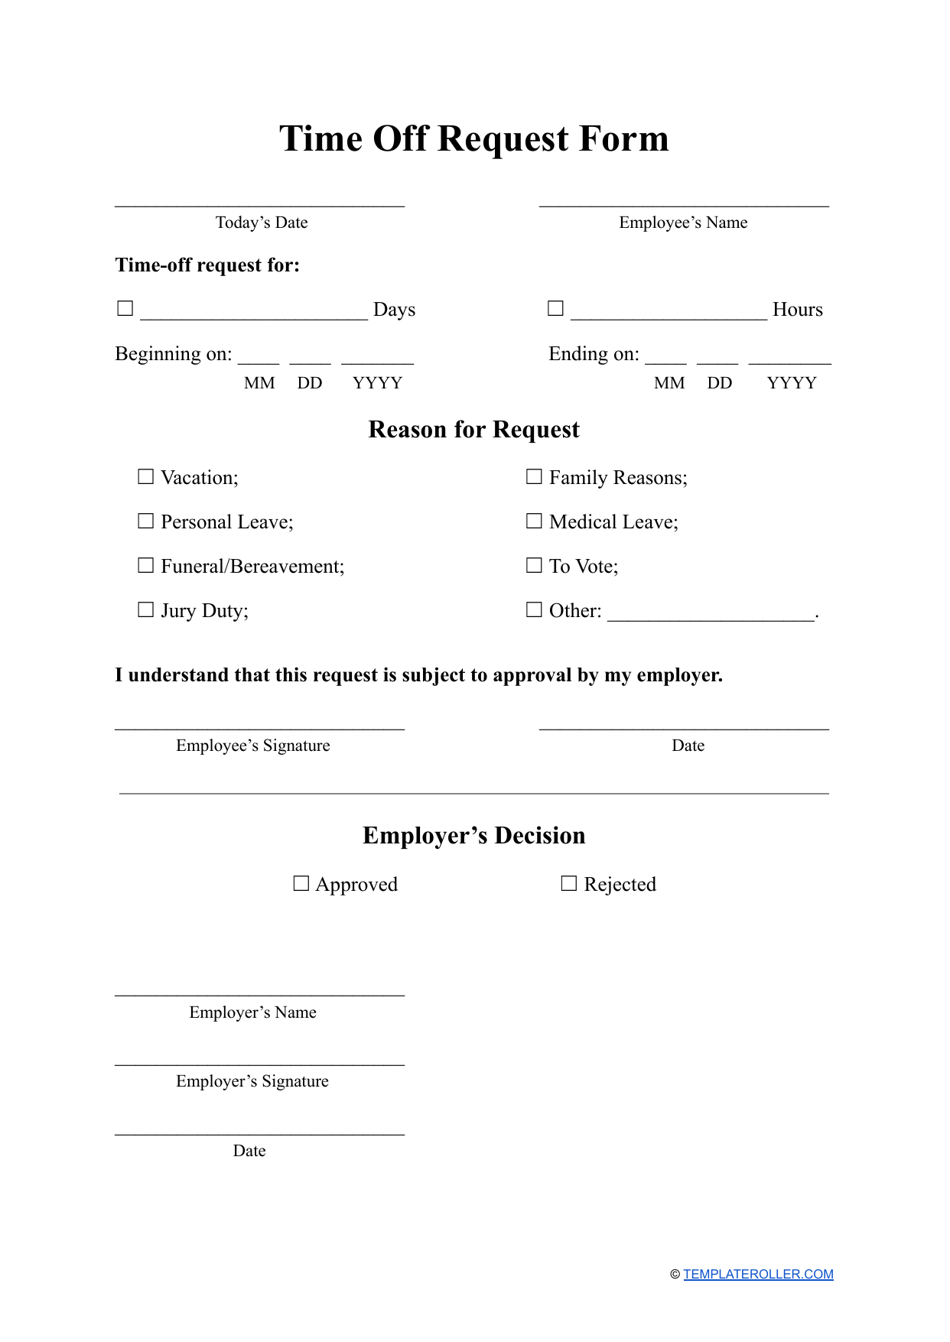 time-off-request-form-download-printable-pdf-templateroller